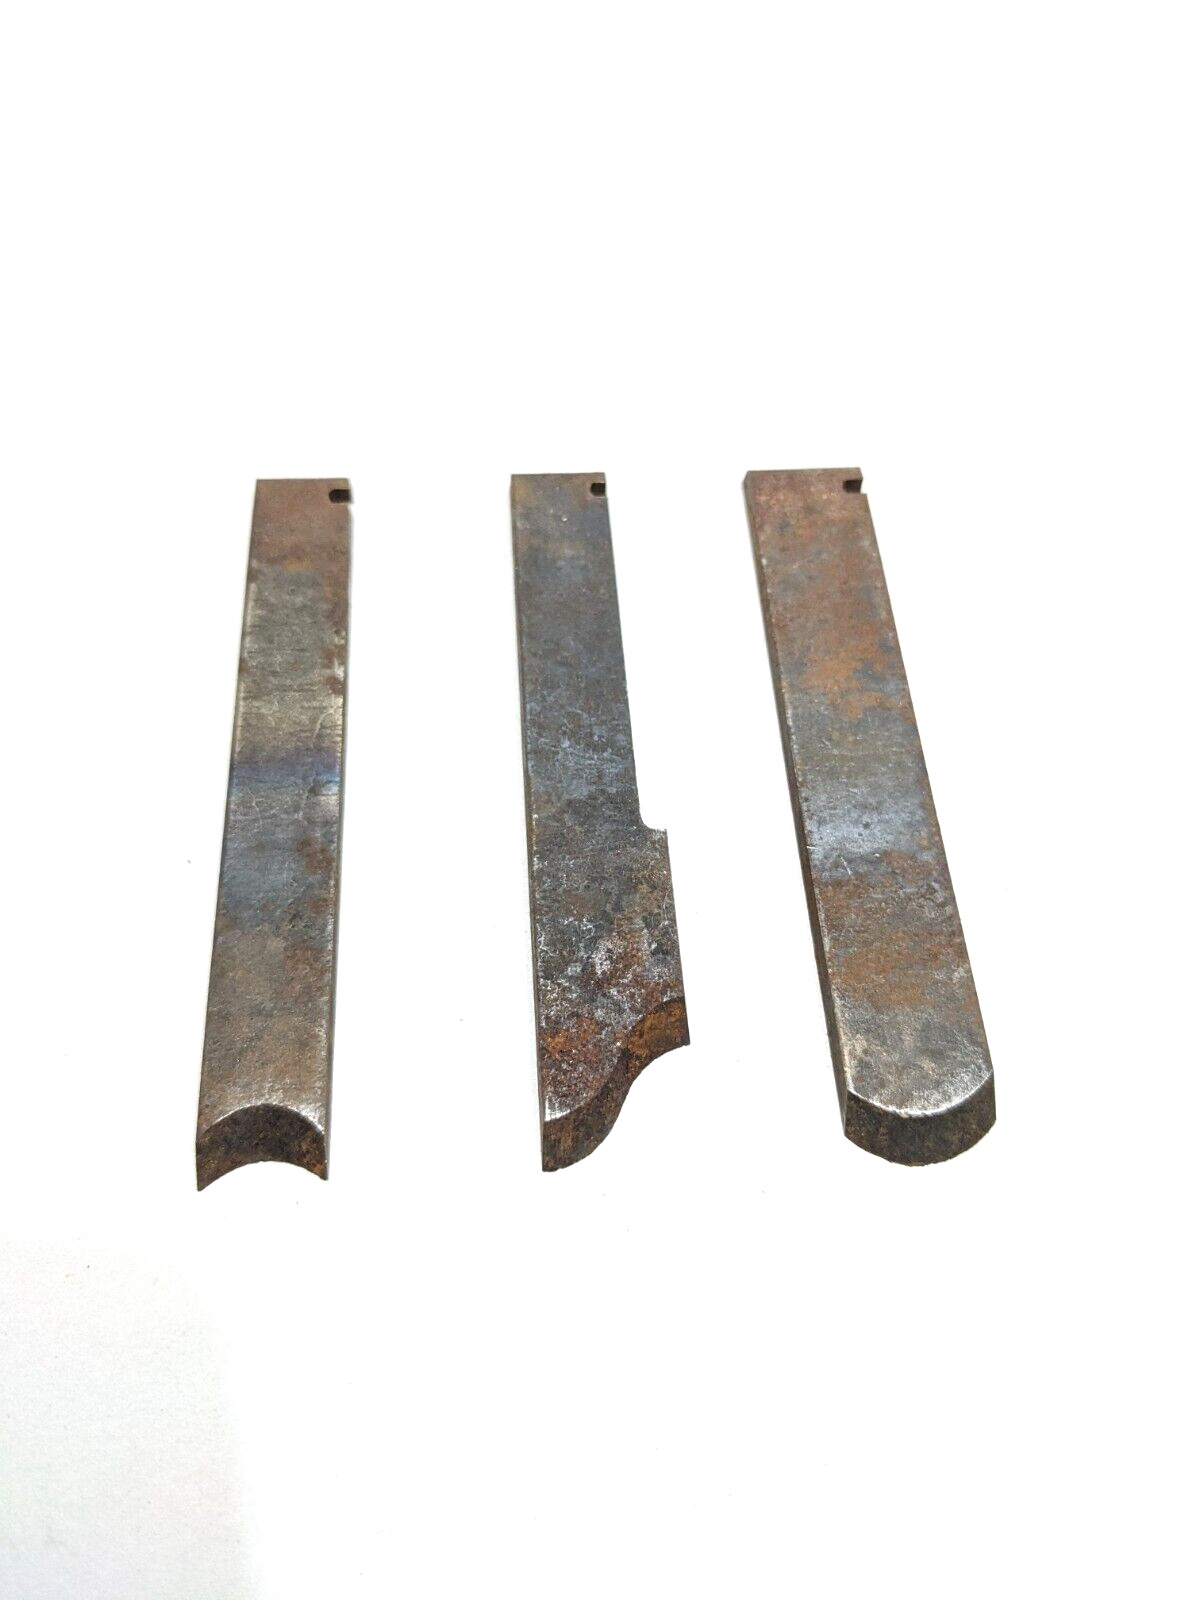 Lot of 3 Cutter Blades for Stanley No. 55 Combination Plane No. 93, 53, 43